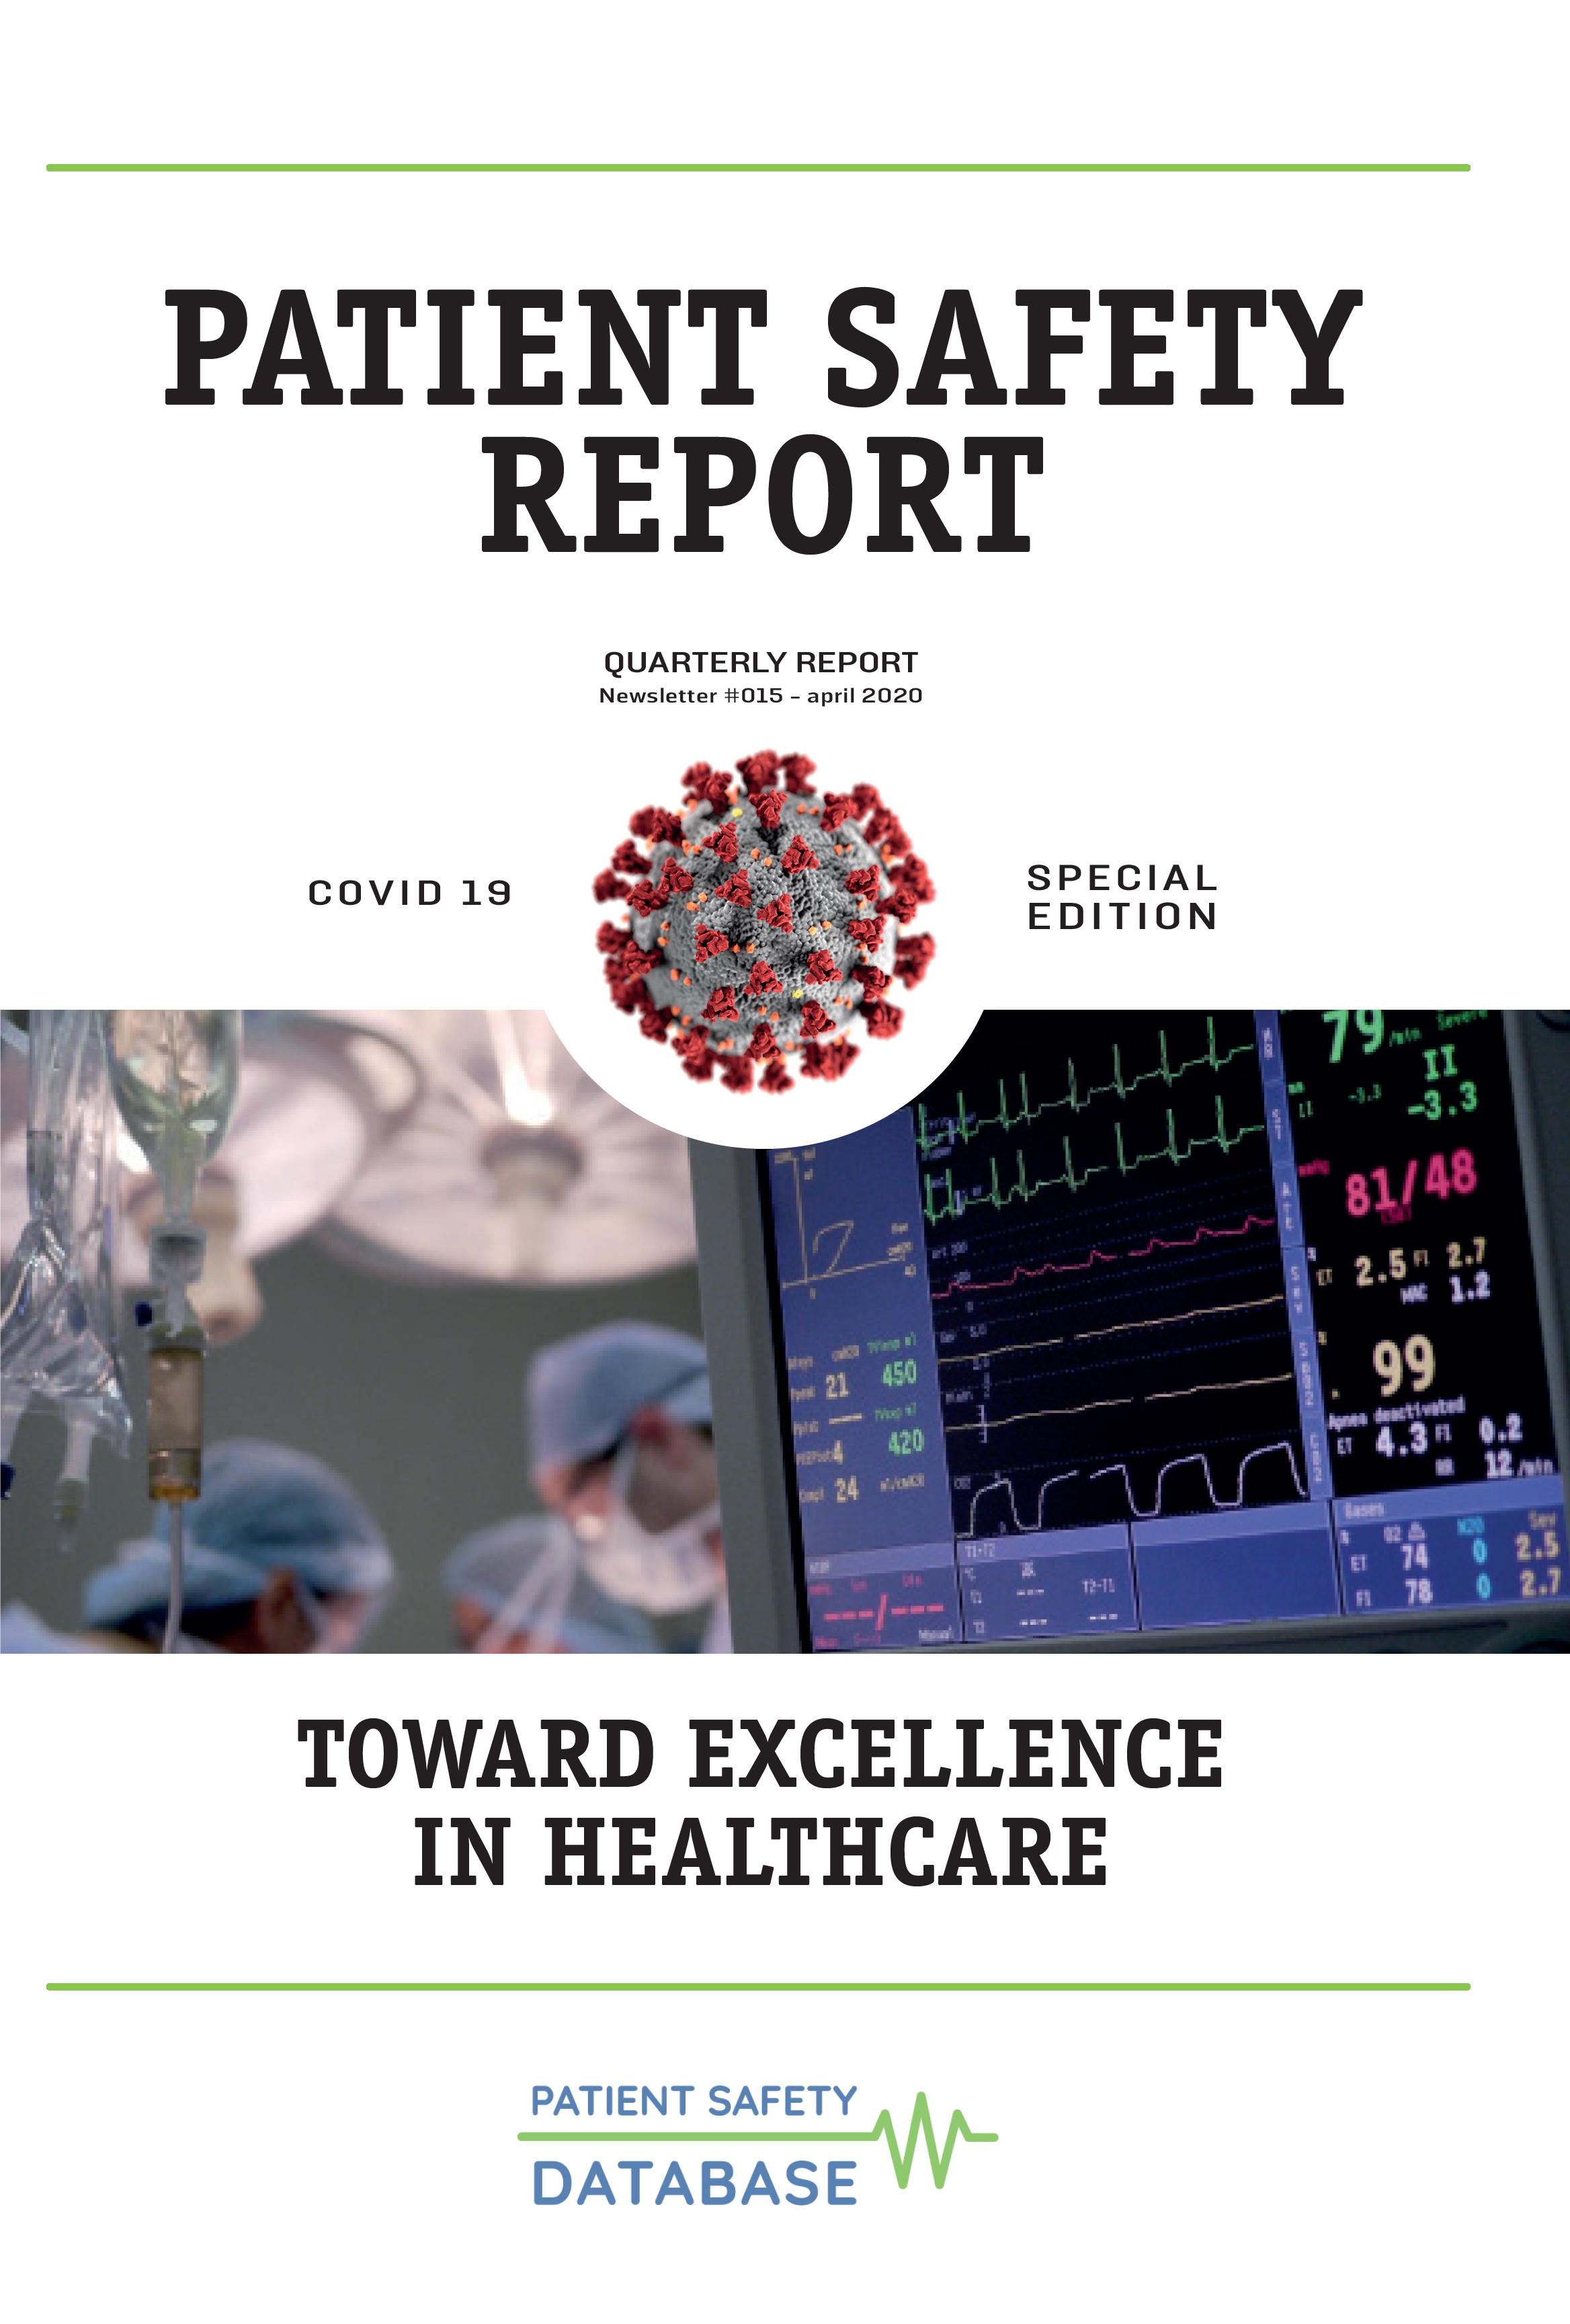 Patient Safety Report – Covid-19 Special Edition